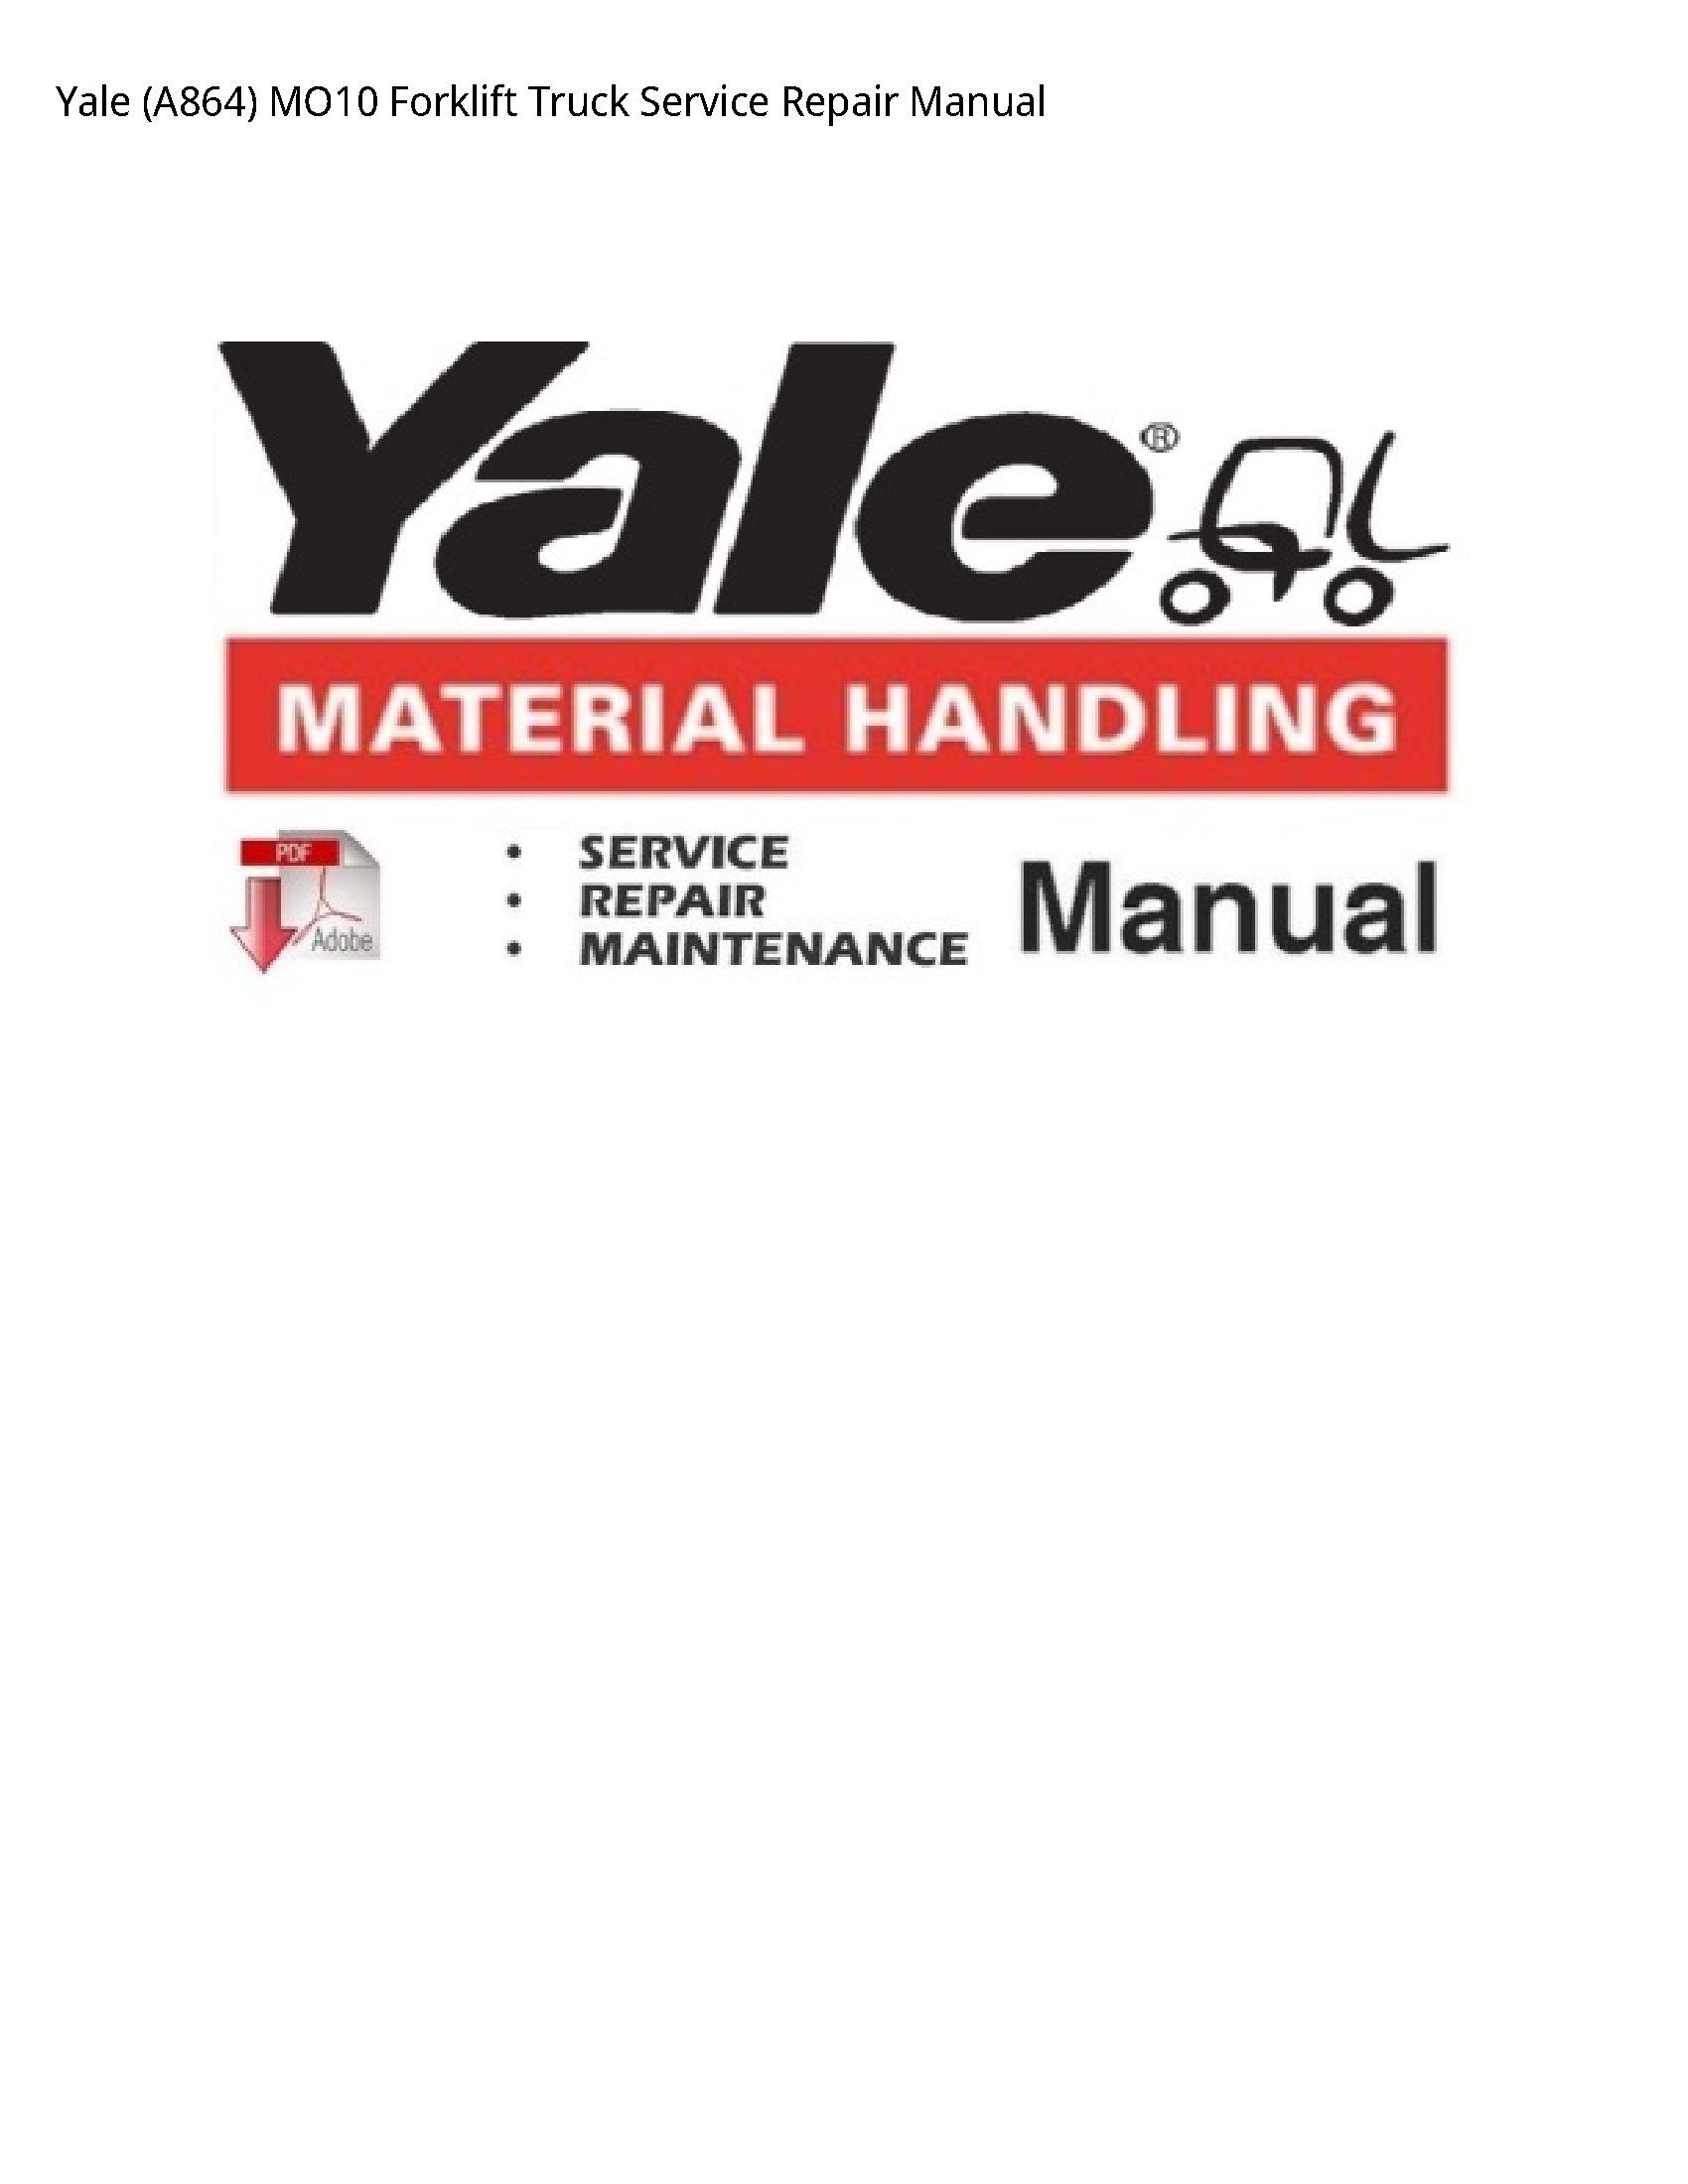 Yale (A864) Forklift Truck manual